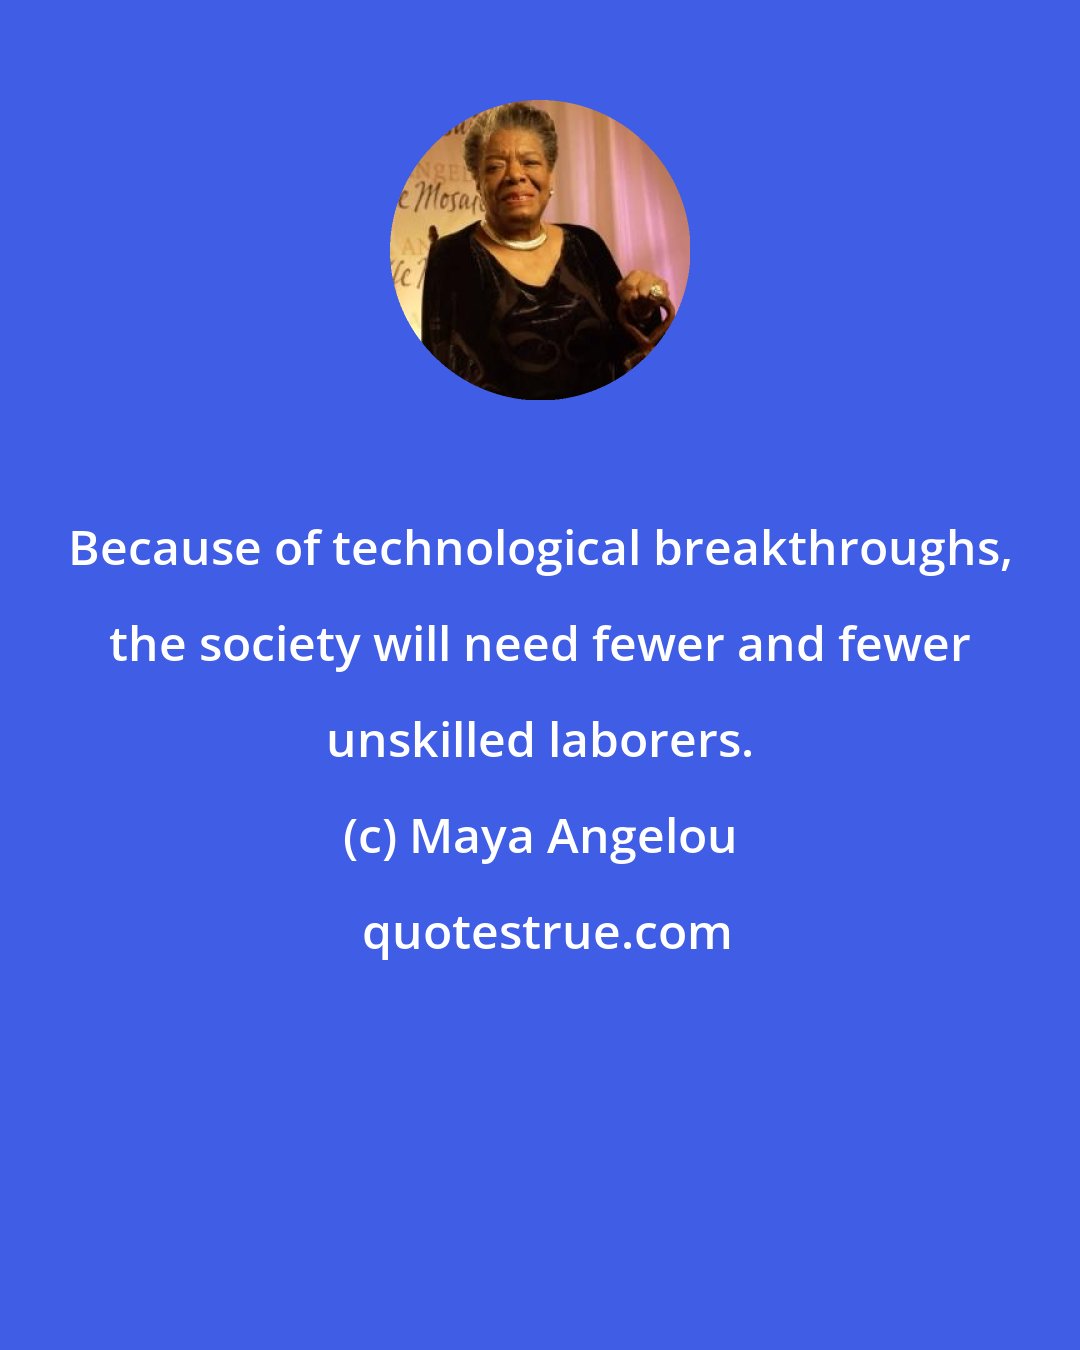 Maya Angelou: Because of technological breakthroughs, the society will need fewer and fewer unskilled laborers.